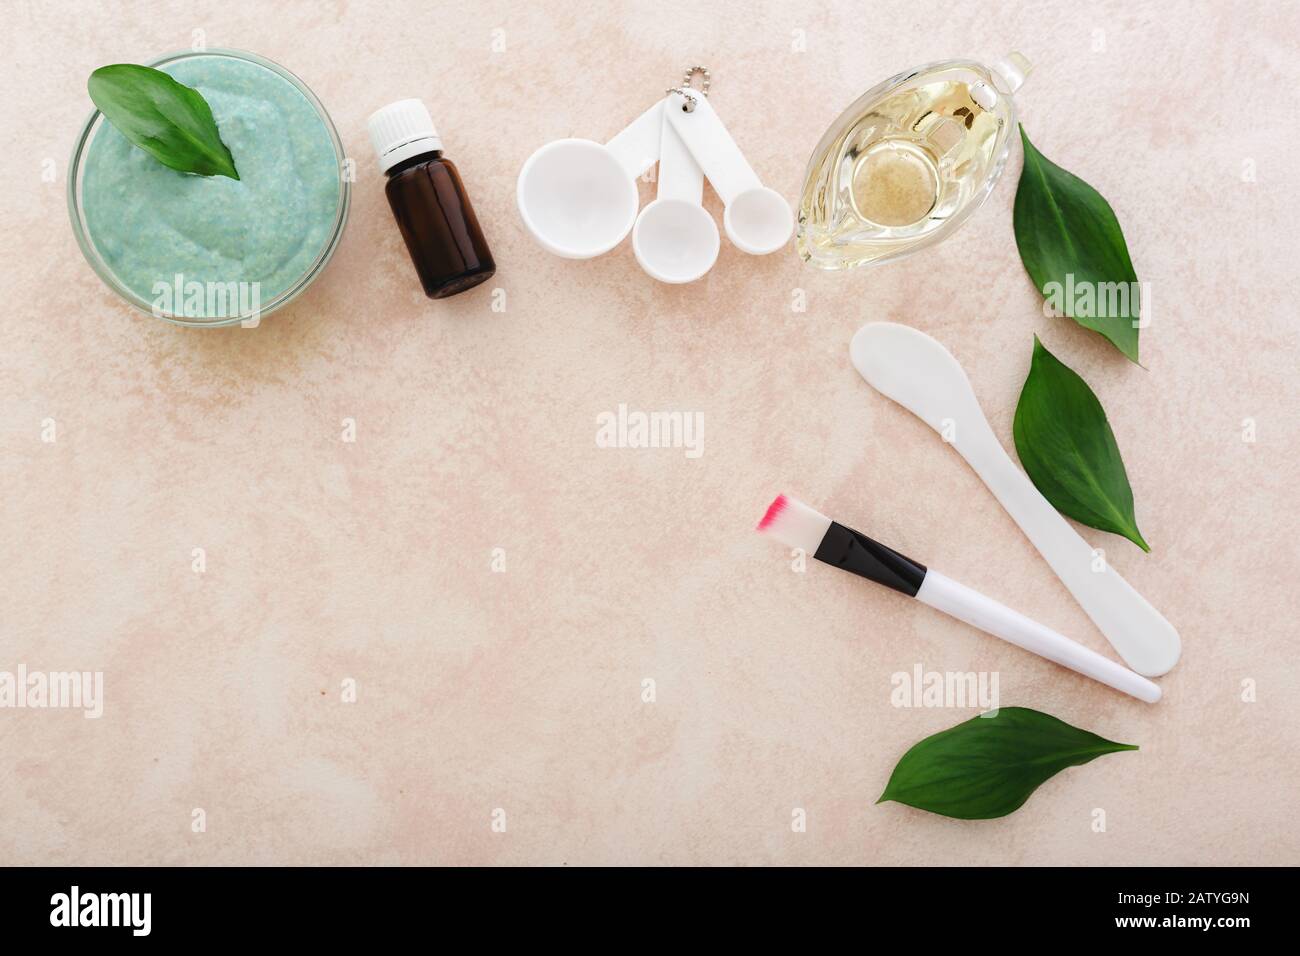 Cosmetology set for cooking, applying face mask. Avocado face mask, spatula, brush, measuring spoons, oil, essential oil on light pink background.Skin Stock Photo